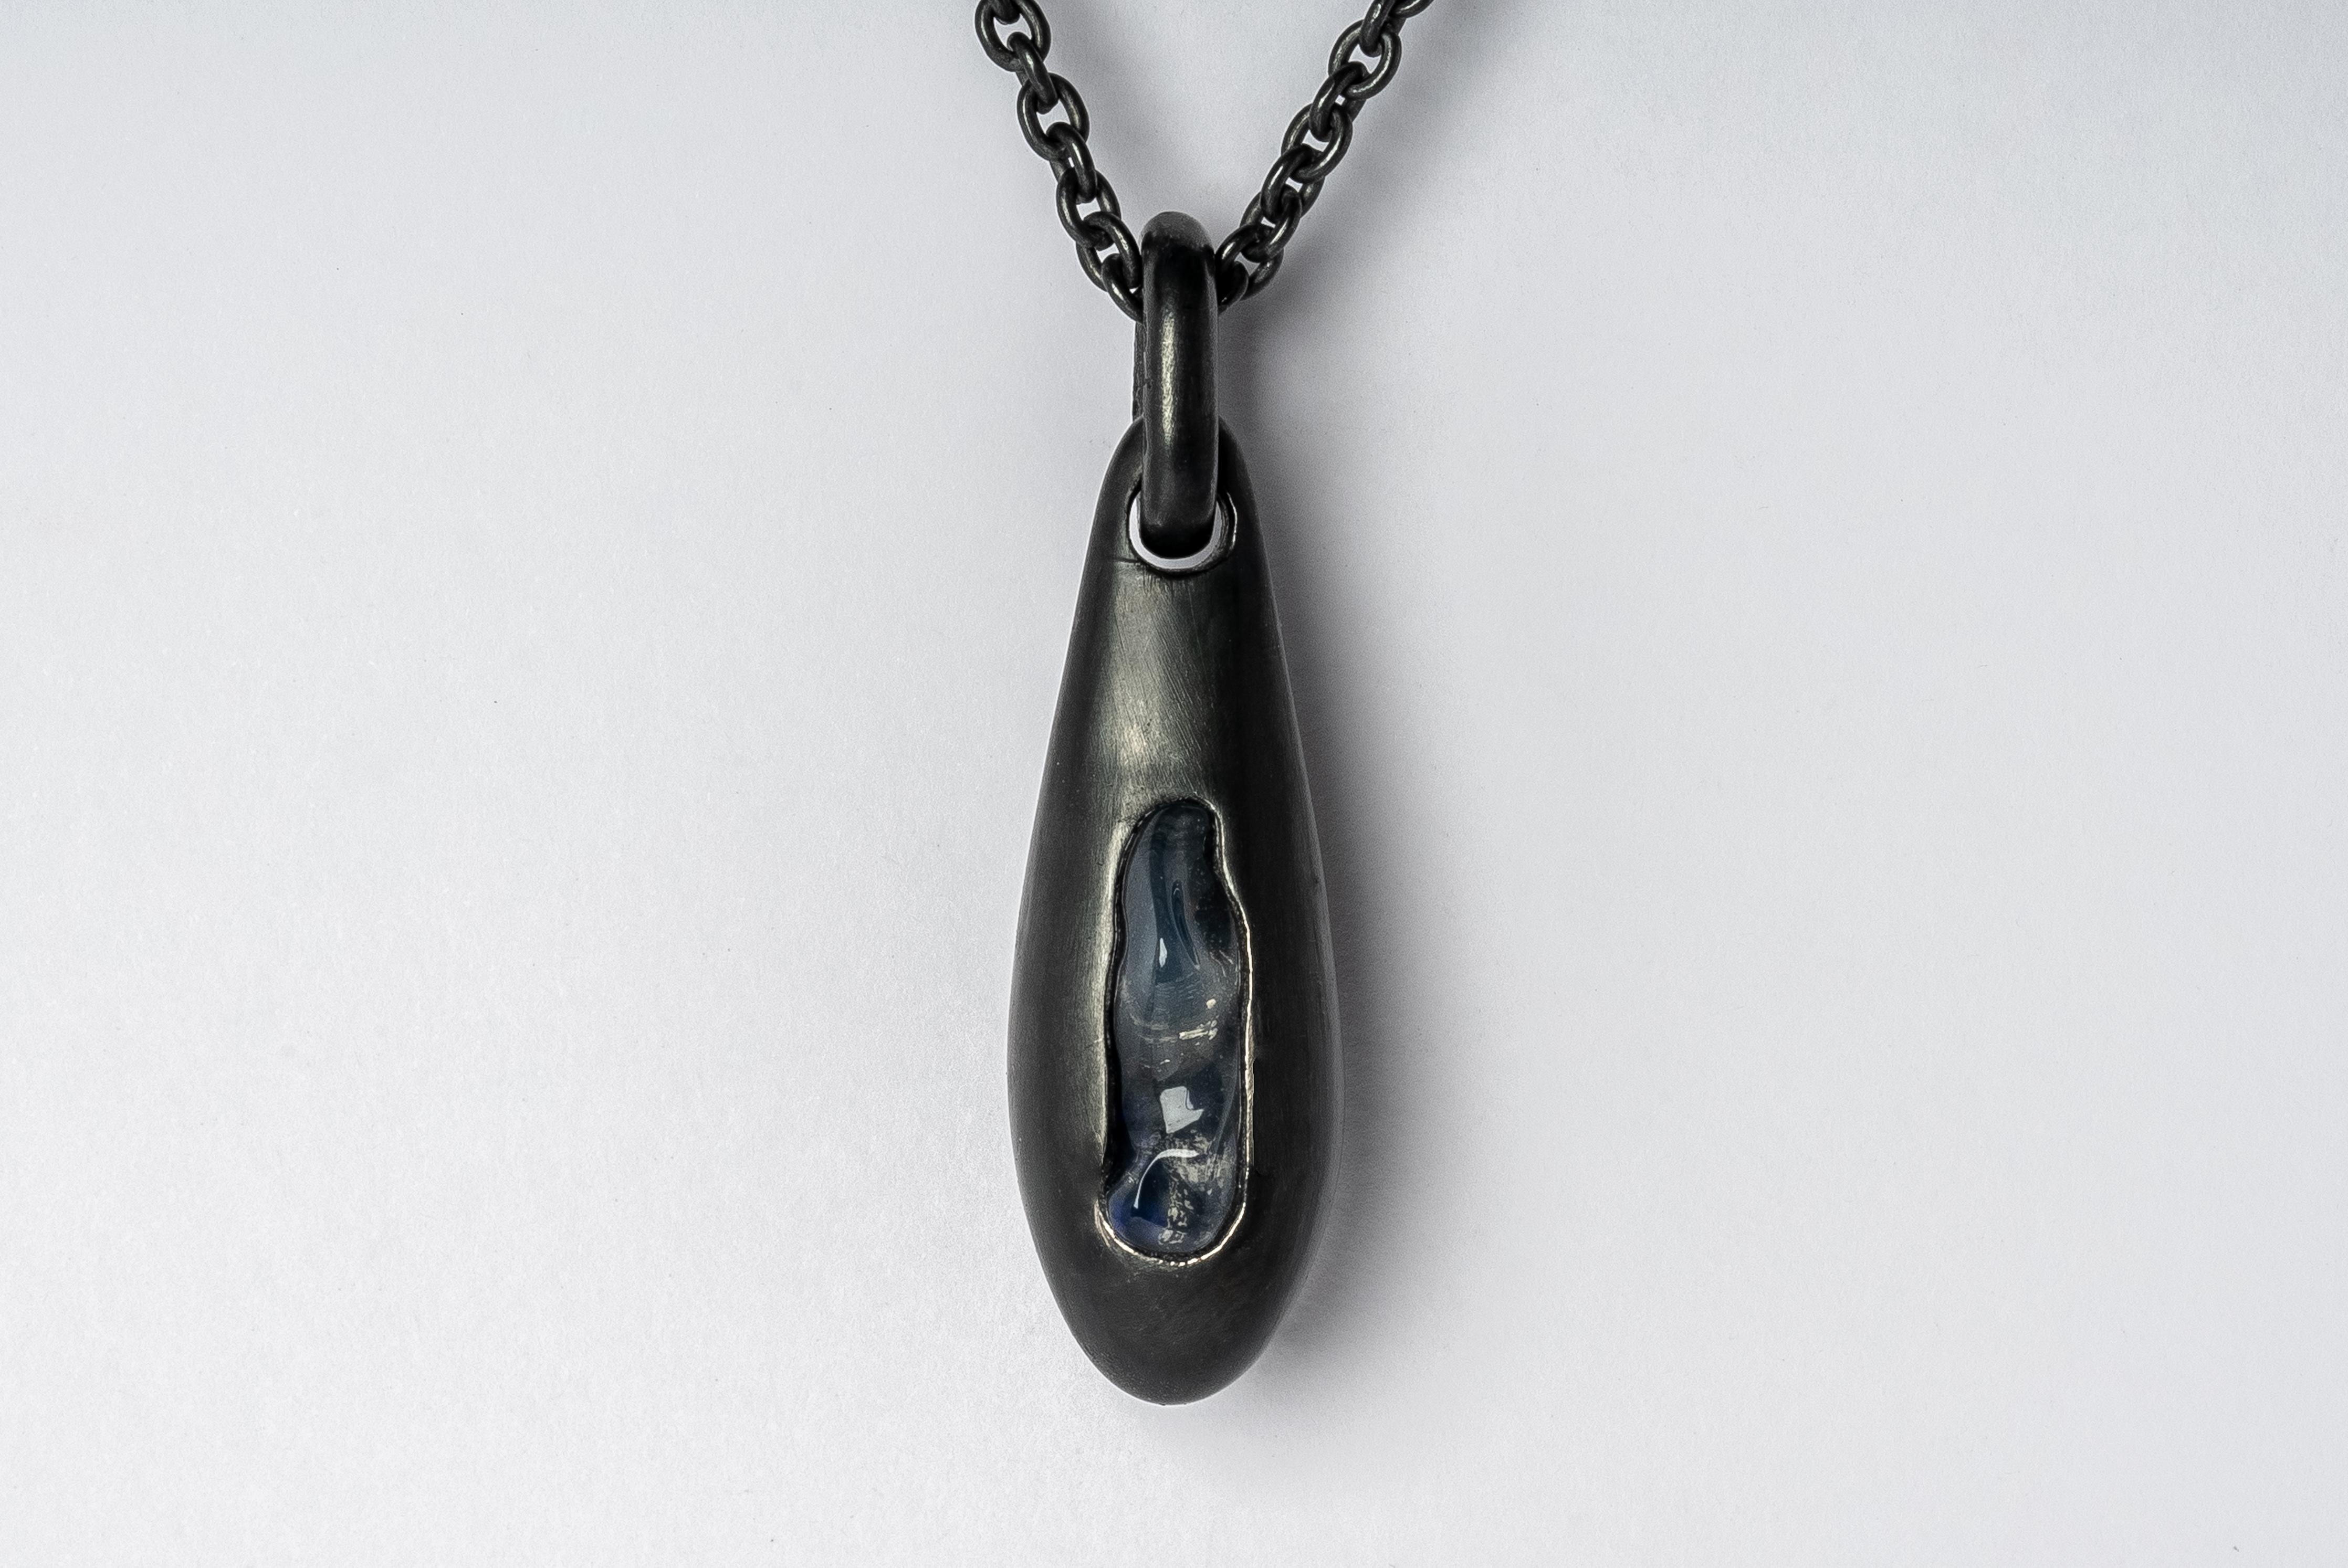 Necklace made in oxidized sterling silver and a slab of rough opal. It comes on 74 cm sterling silver chain.